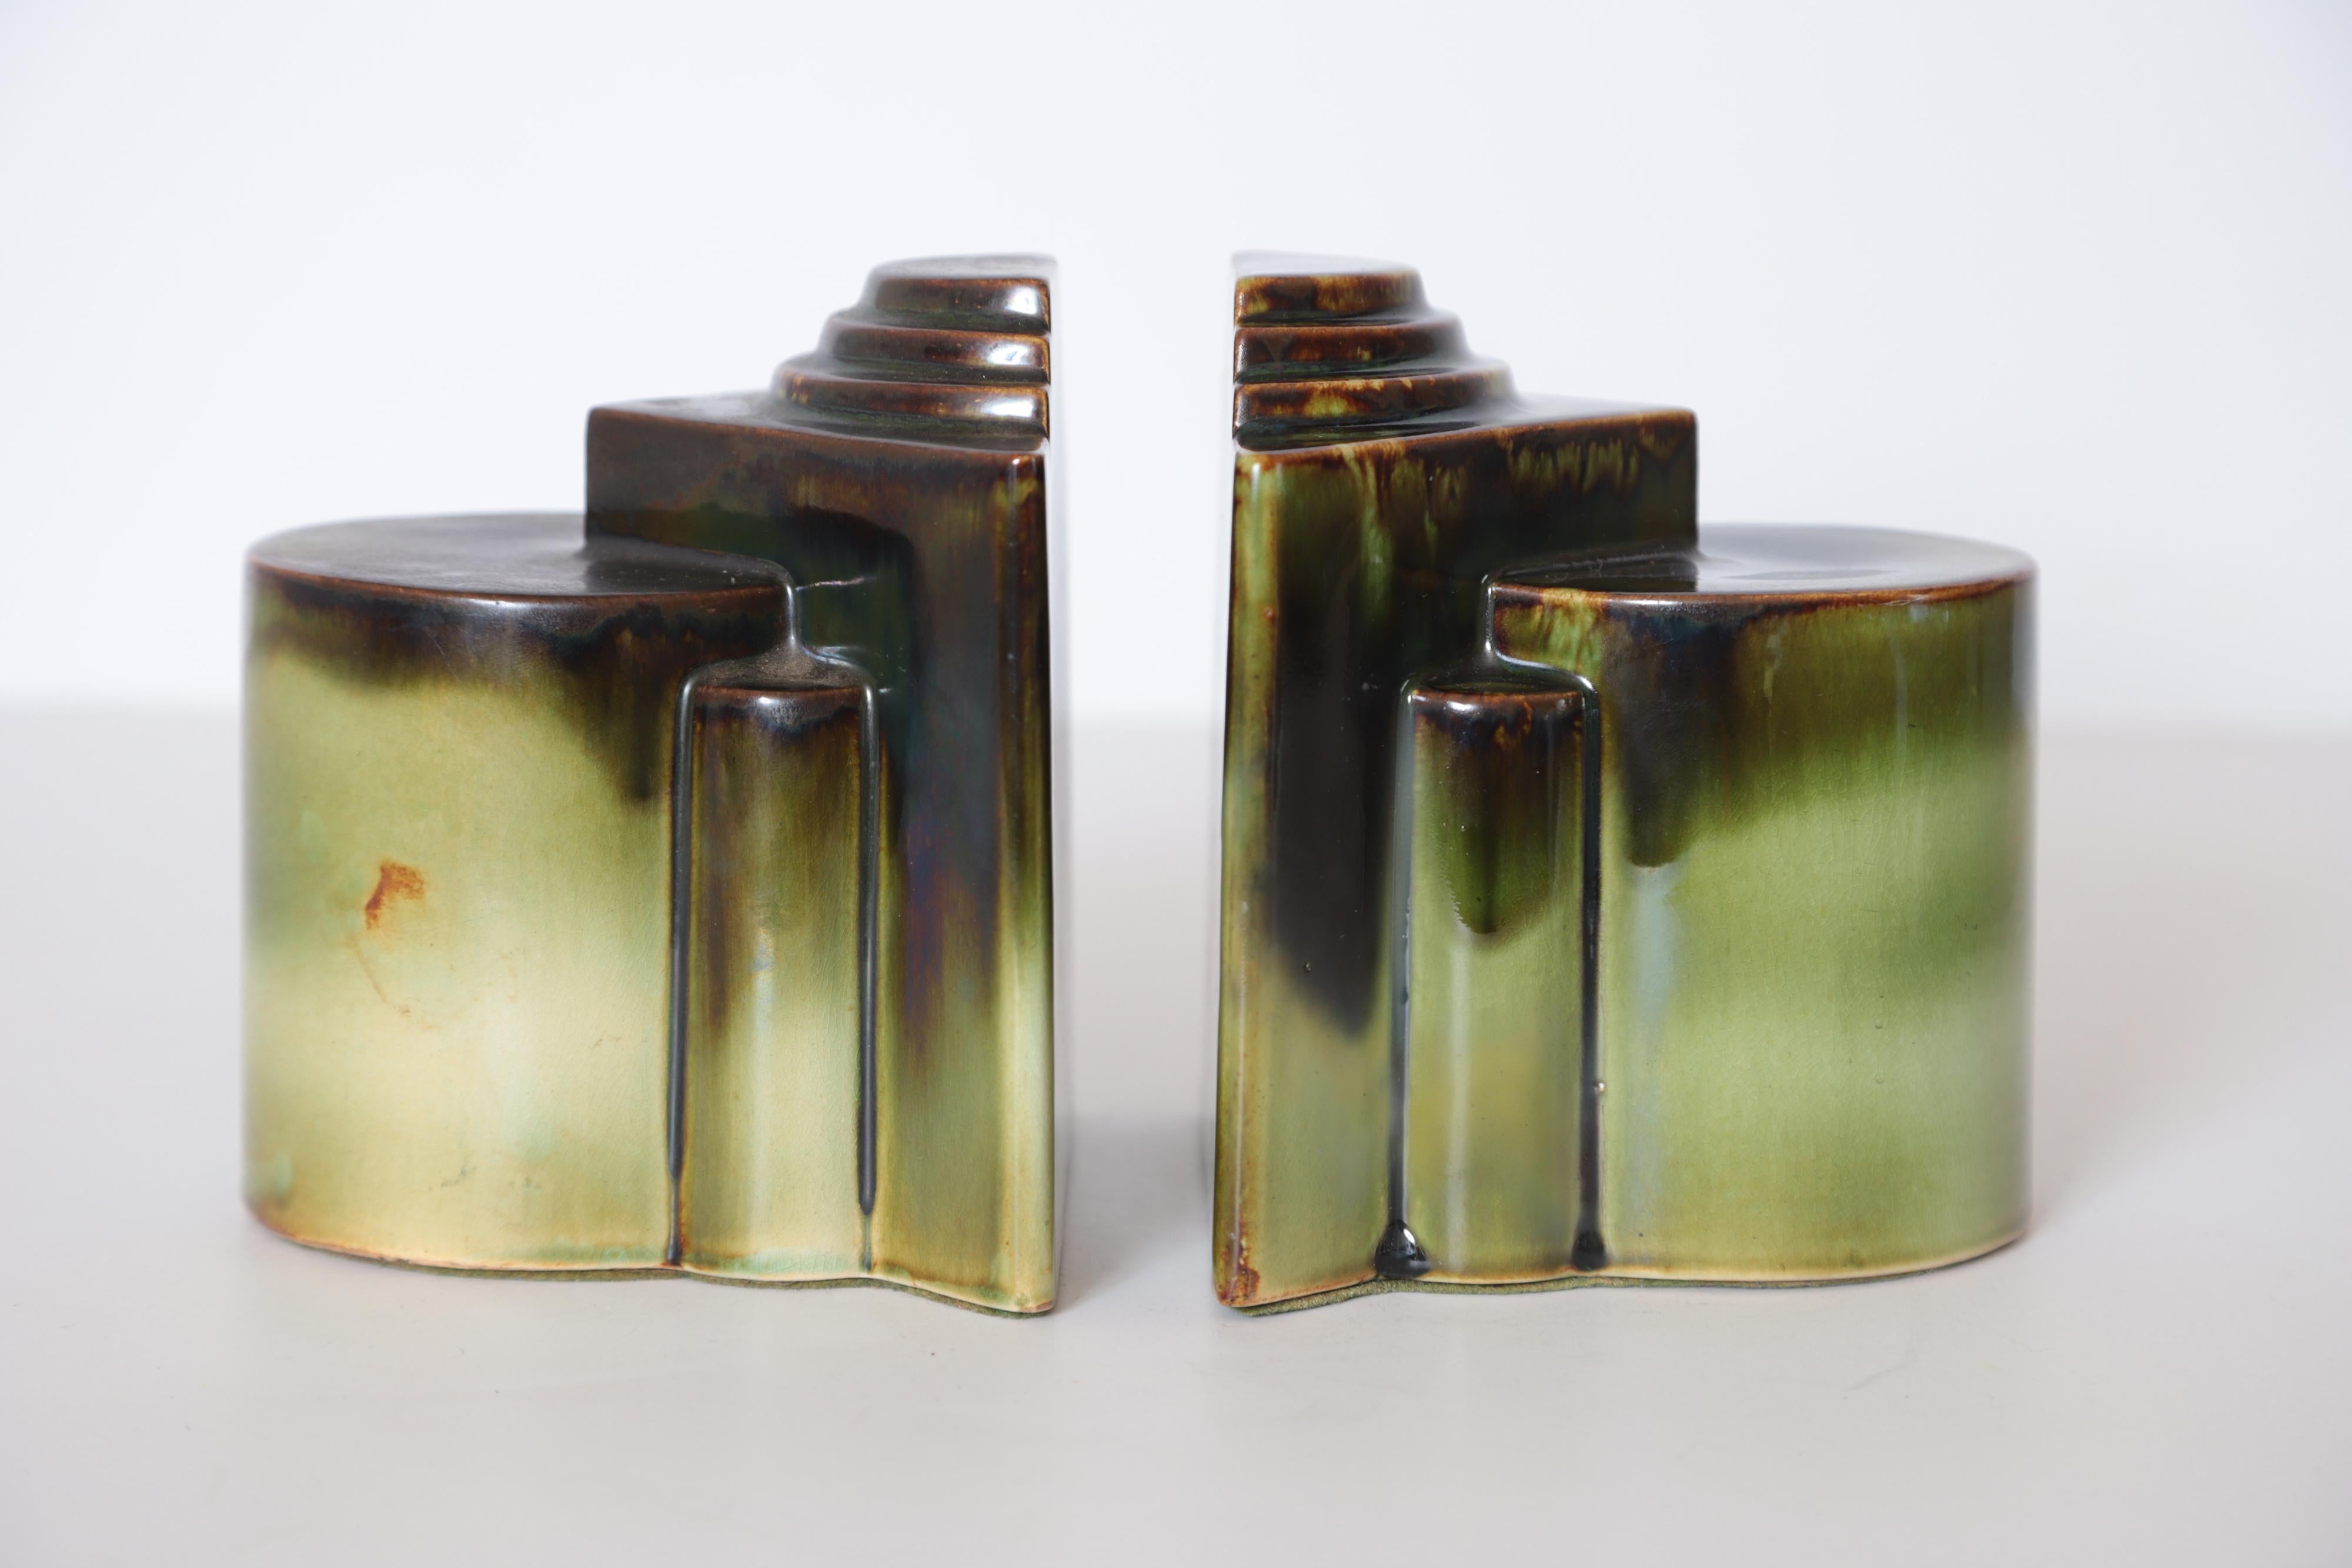 Important Art Deco Gale Turnbull for Leigh Potters bookends, circa 1929, Leigh art ware

Uncommon example of the early American streamline skyscraper cubist architectural design motif.
Very nice multi-hued green drip with brown edge